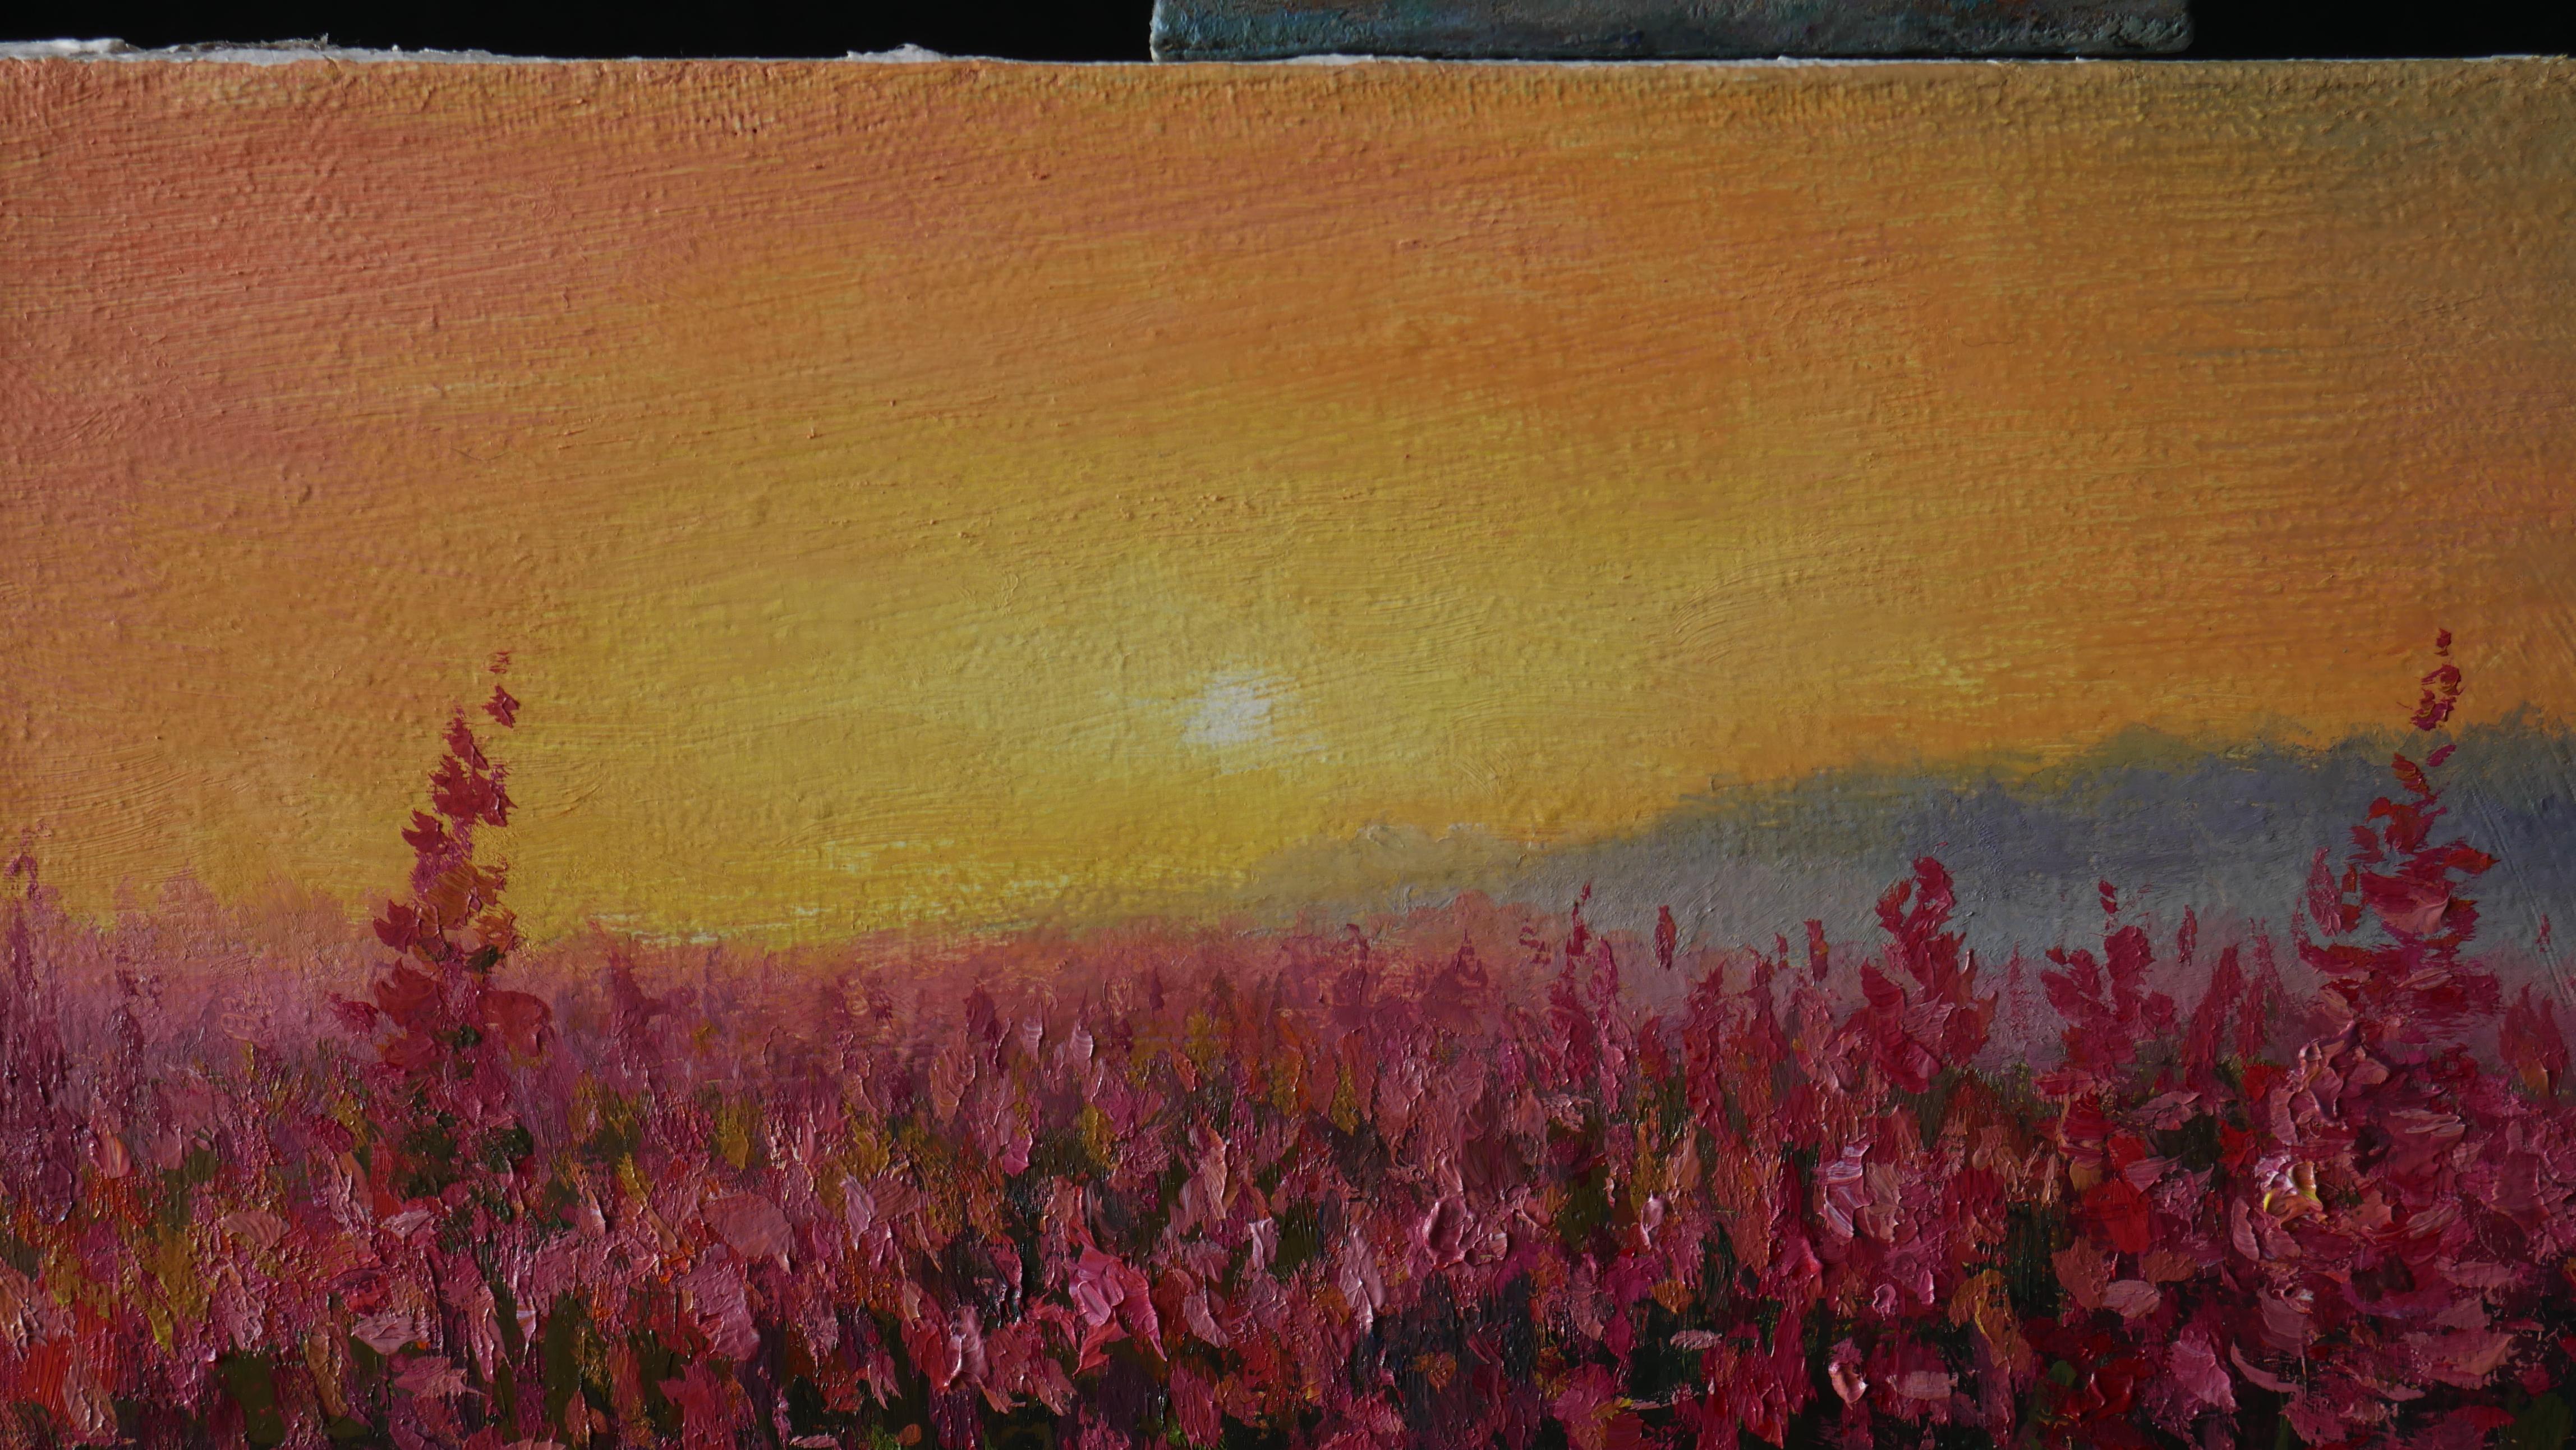 Oil painting is not just a dawn, field and meadow flowers, an artist conveyed his warmest feelings for nature, beautiful purple flowers of fireweed harmoniously complement the summer dawn. The artist is always admired by mornings and evenings.